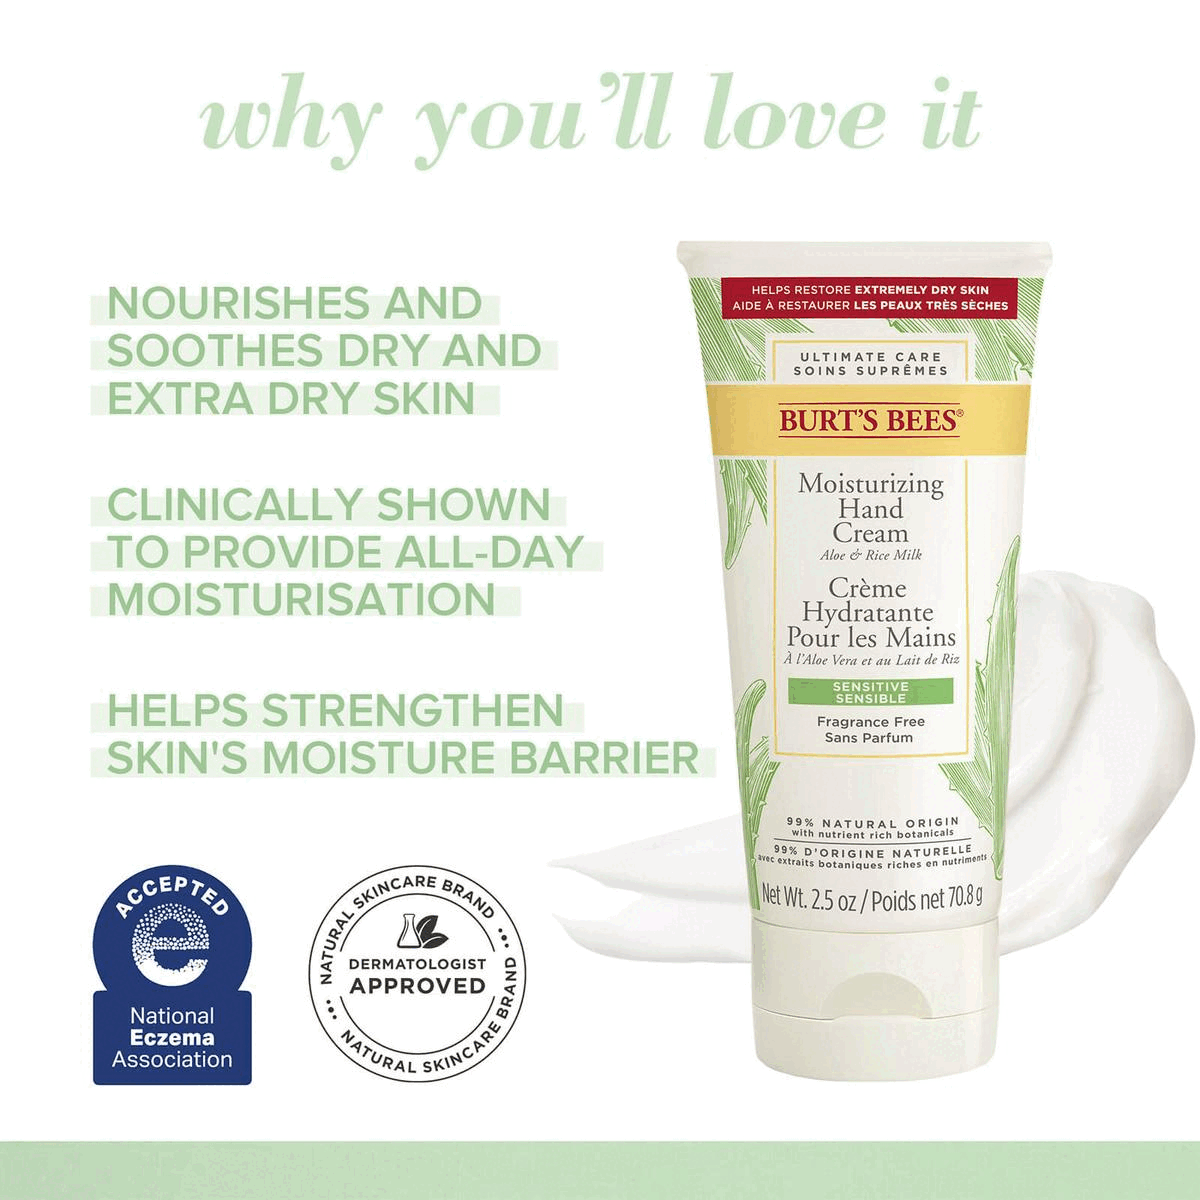 
              why you will love it 
              NOURISHES AND SOOTHES DRY AND EXTRA DRY SKIN 
              CLINICALLY SHOWN TO PROVIDE ALL DAY MOISTURISATION 
              HELPS STRENGTHEN SKIN'S MOISTURE BARRIER,
              DERMATOLOGIST APPROVED,
              Aloe Vera and Rice Milk to hydrate and soothe skin, Nutrient Rich with Baobab Oil to nourish skin,
              KIND TO SKIN & PLANET SINCE 1984 
              Ingredients From Nature 
              Leaping Bunny Certified 
              Landfill-free Operations 
              oiA 
              Responsible Sourcing 
              Recyclable Packaging 
              